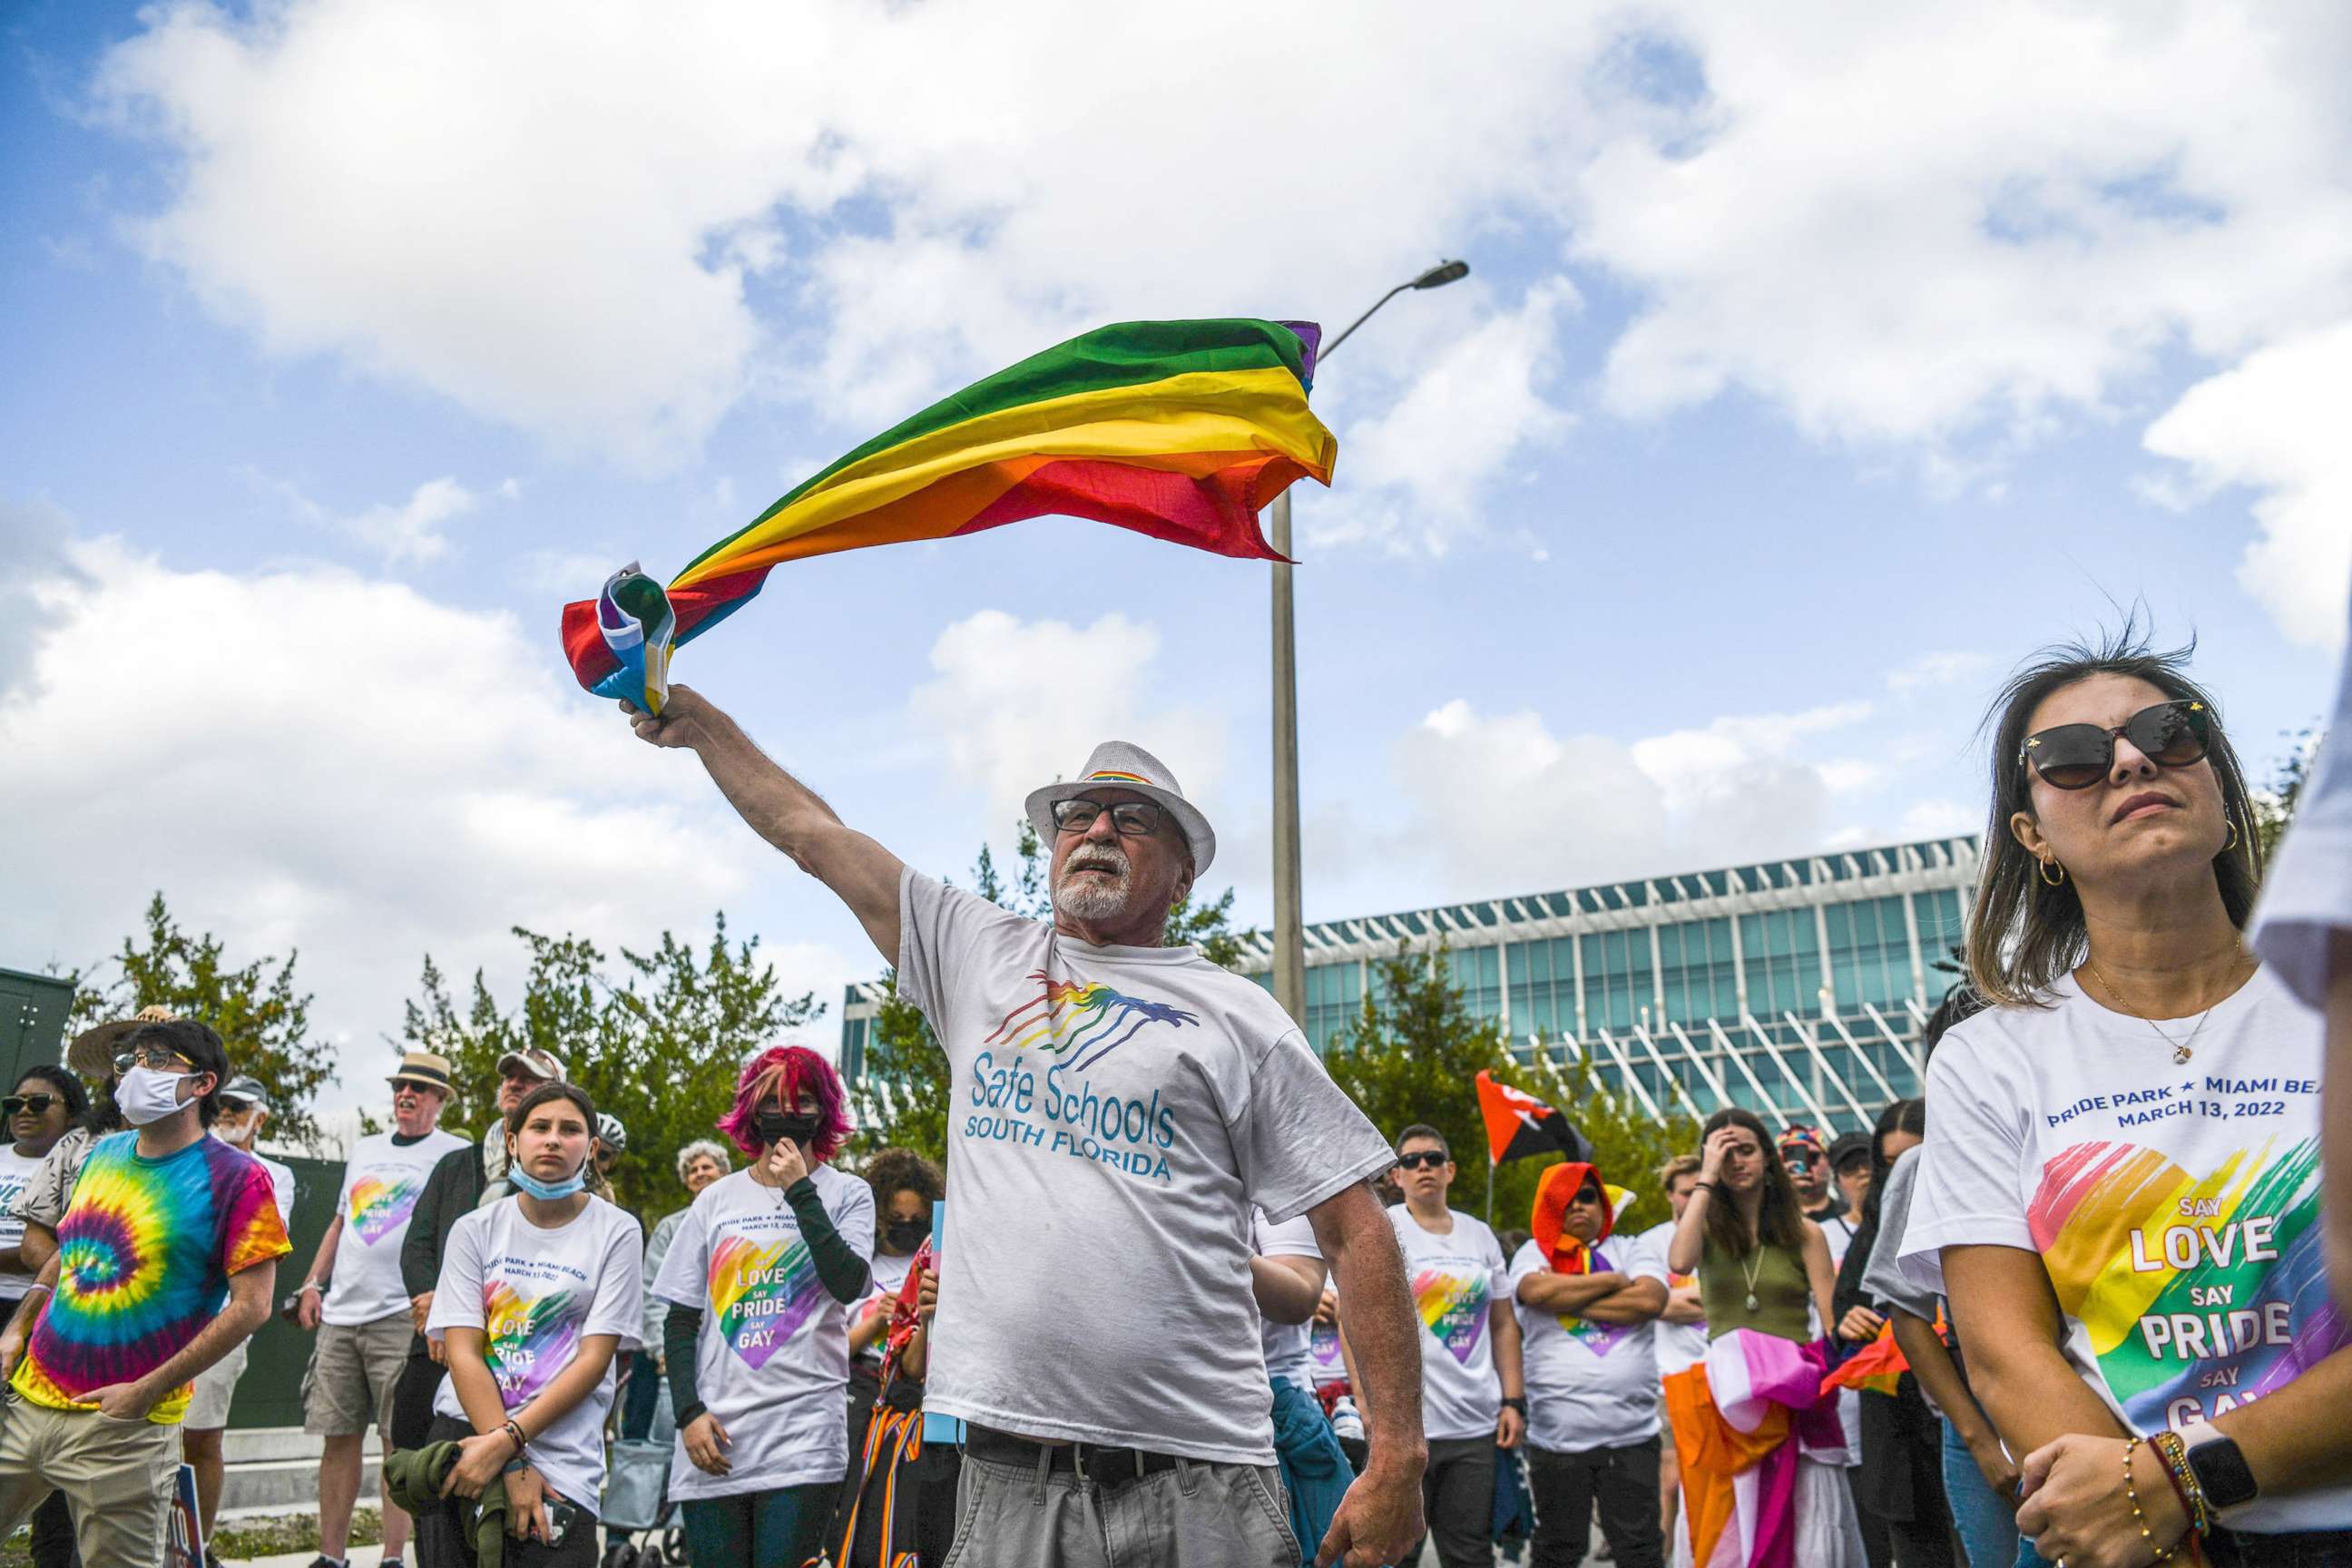 PHOTO: Members and supporters of the LGBTQ community attend the "Say Gay Anyway" rally in Miami, March 13, 2022. Florida's state senate passed a controversial bill on March 8 banning lessons on sexual orientation and gender identity in elementary schools.